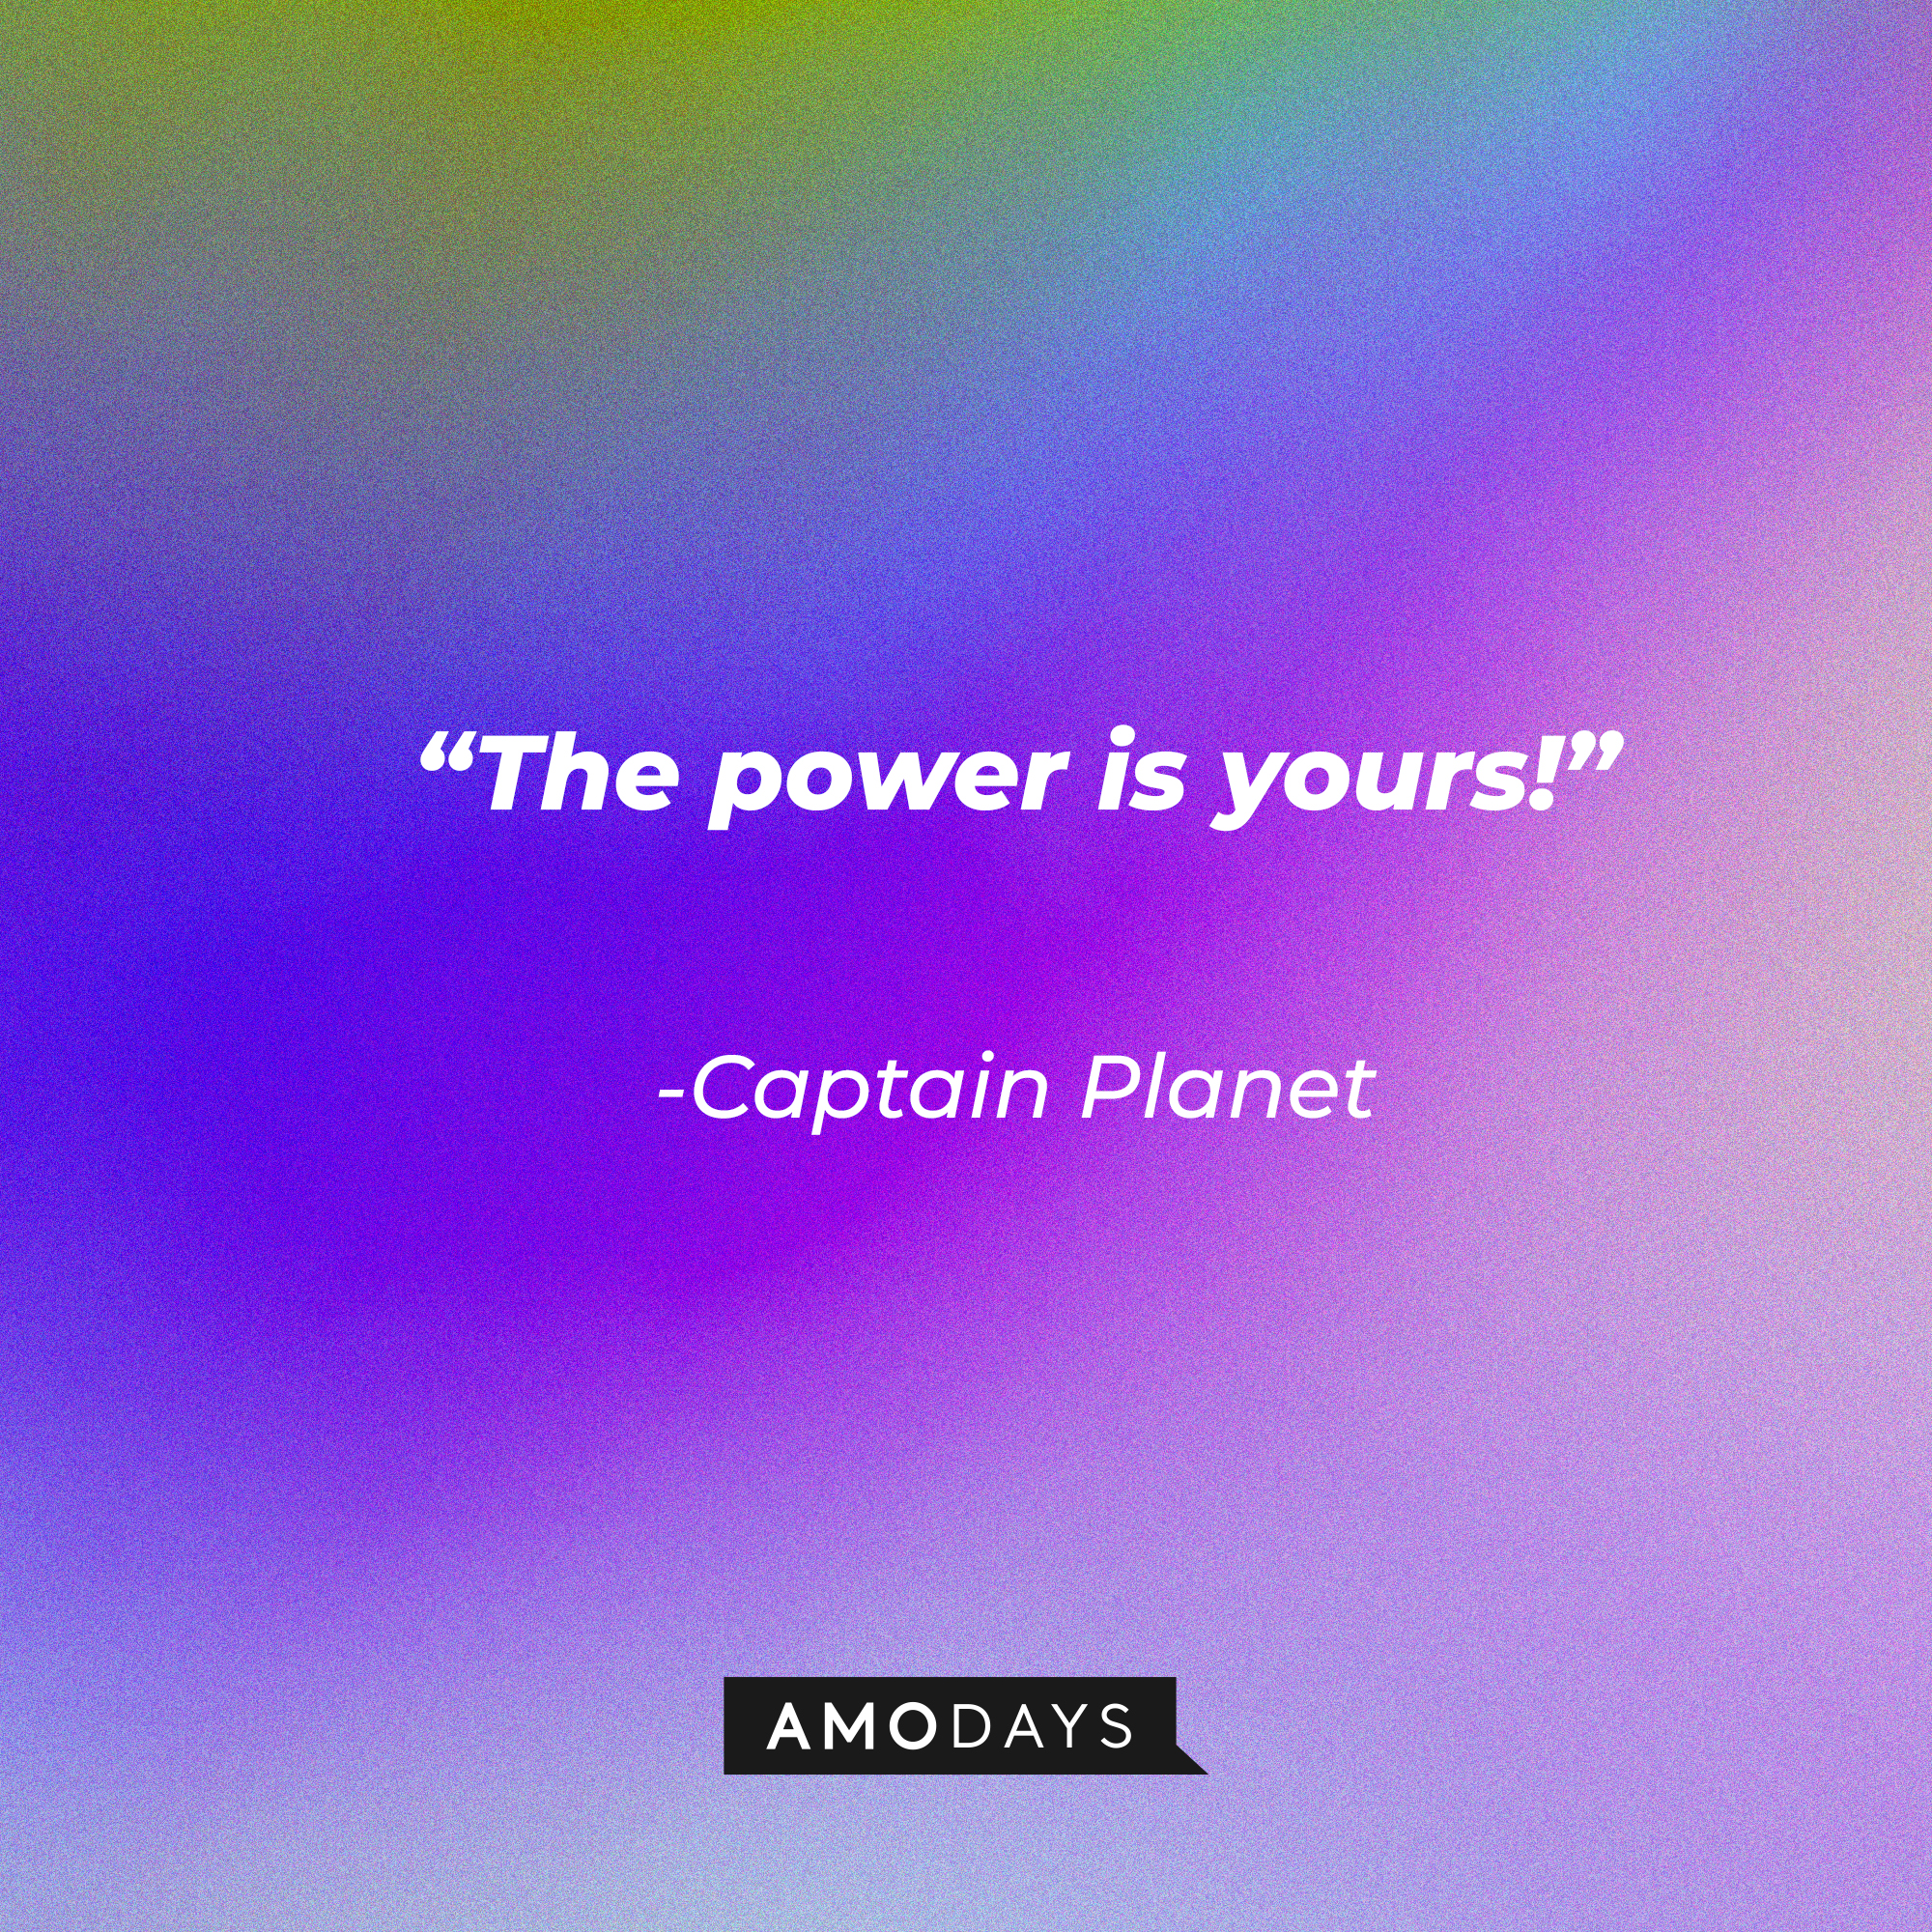 Captain Planet's quote: “The power is yours!” | Source: Amodays